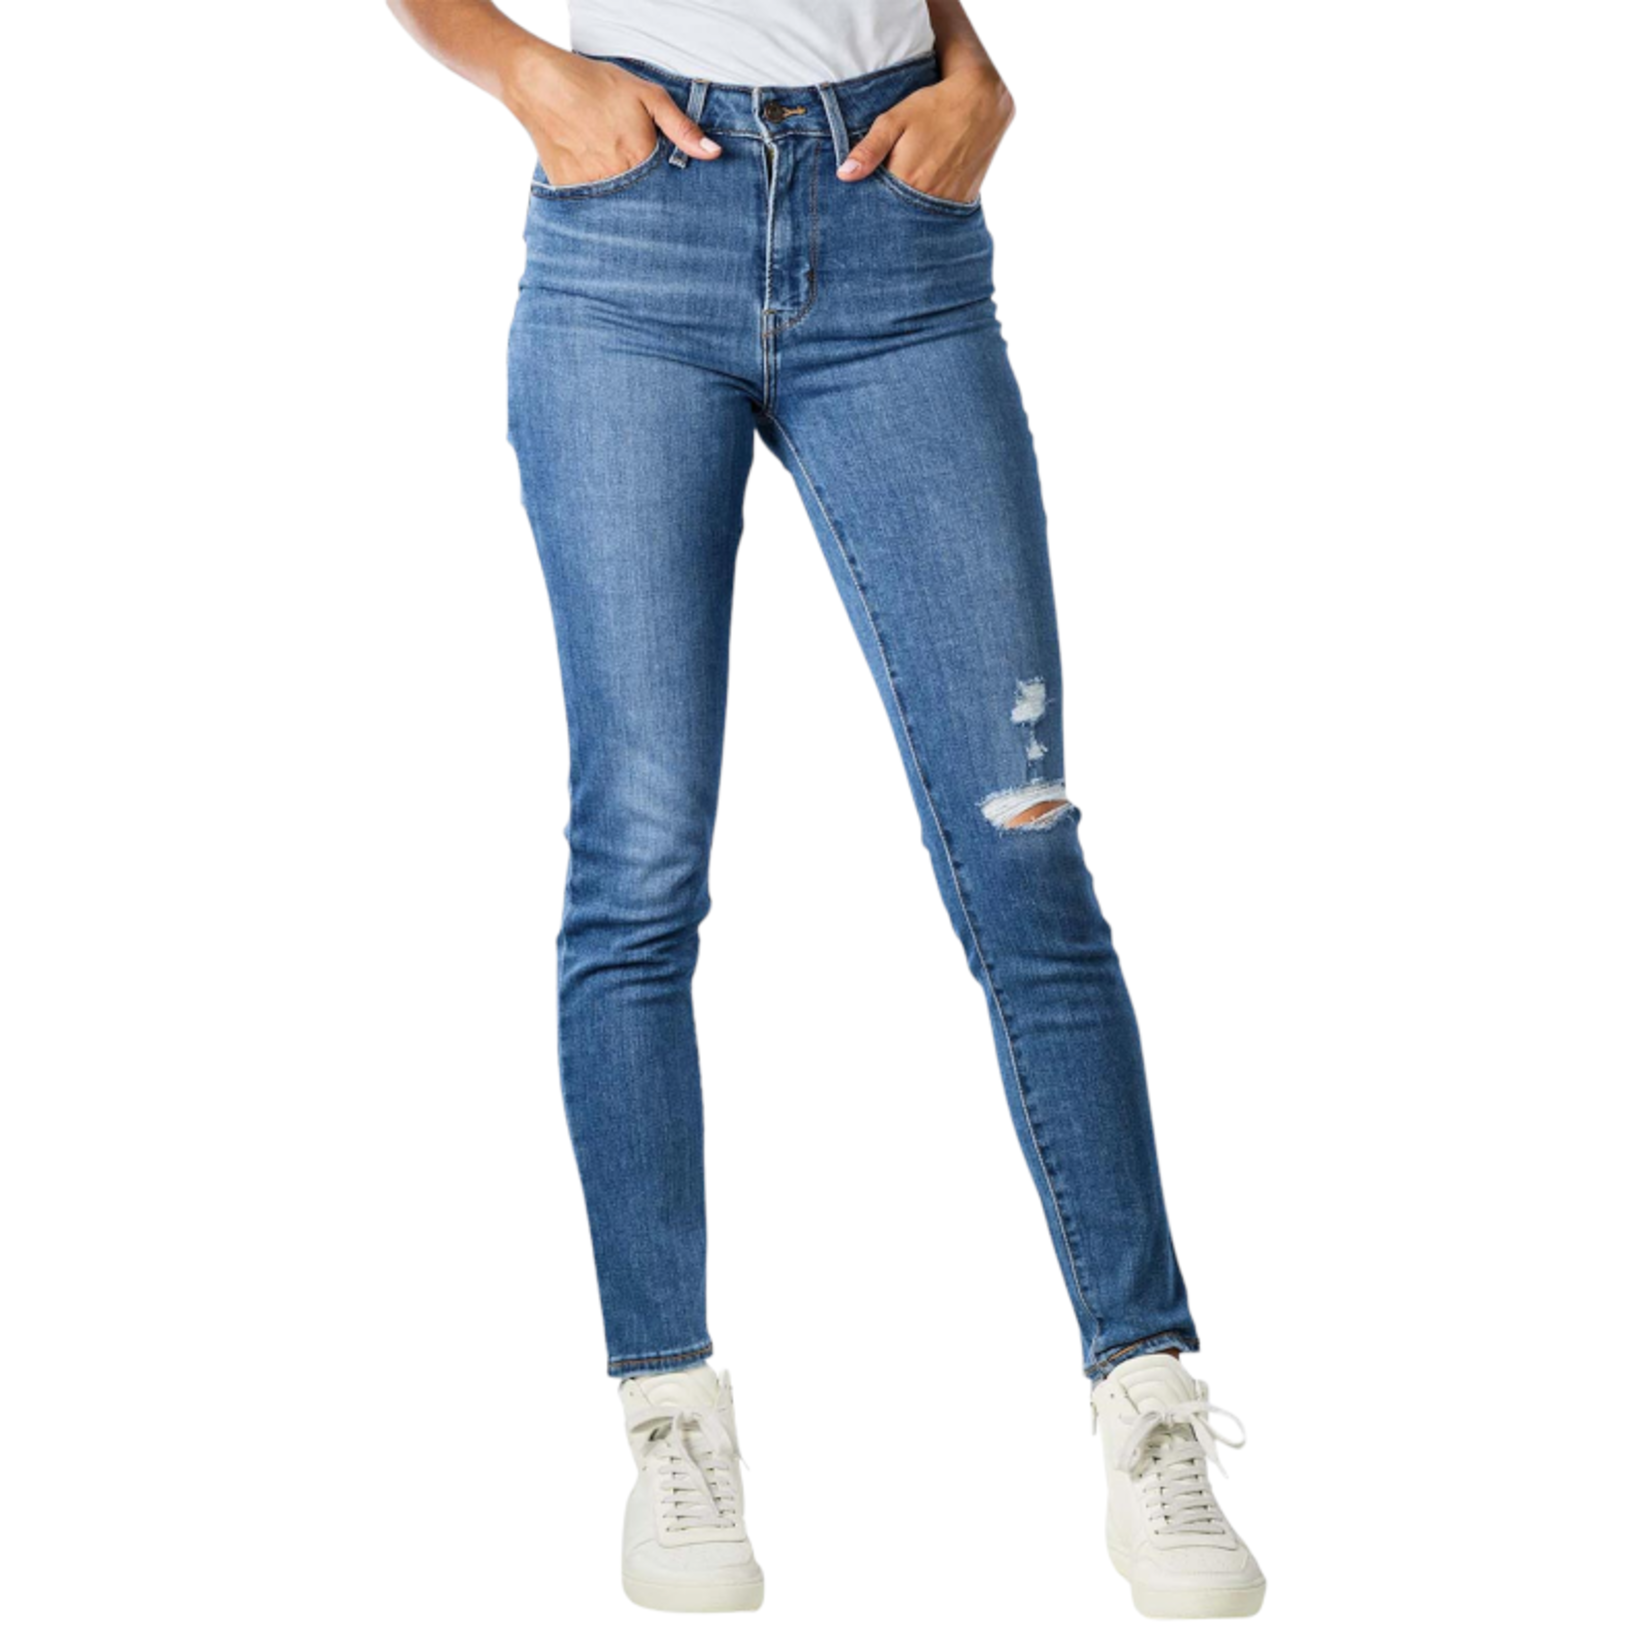 LEVIS 721 HIGH RISE SKINNY 18882-0518 - Michael's and Jody's